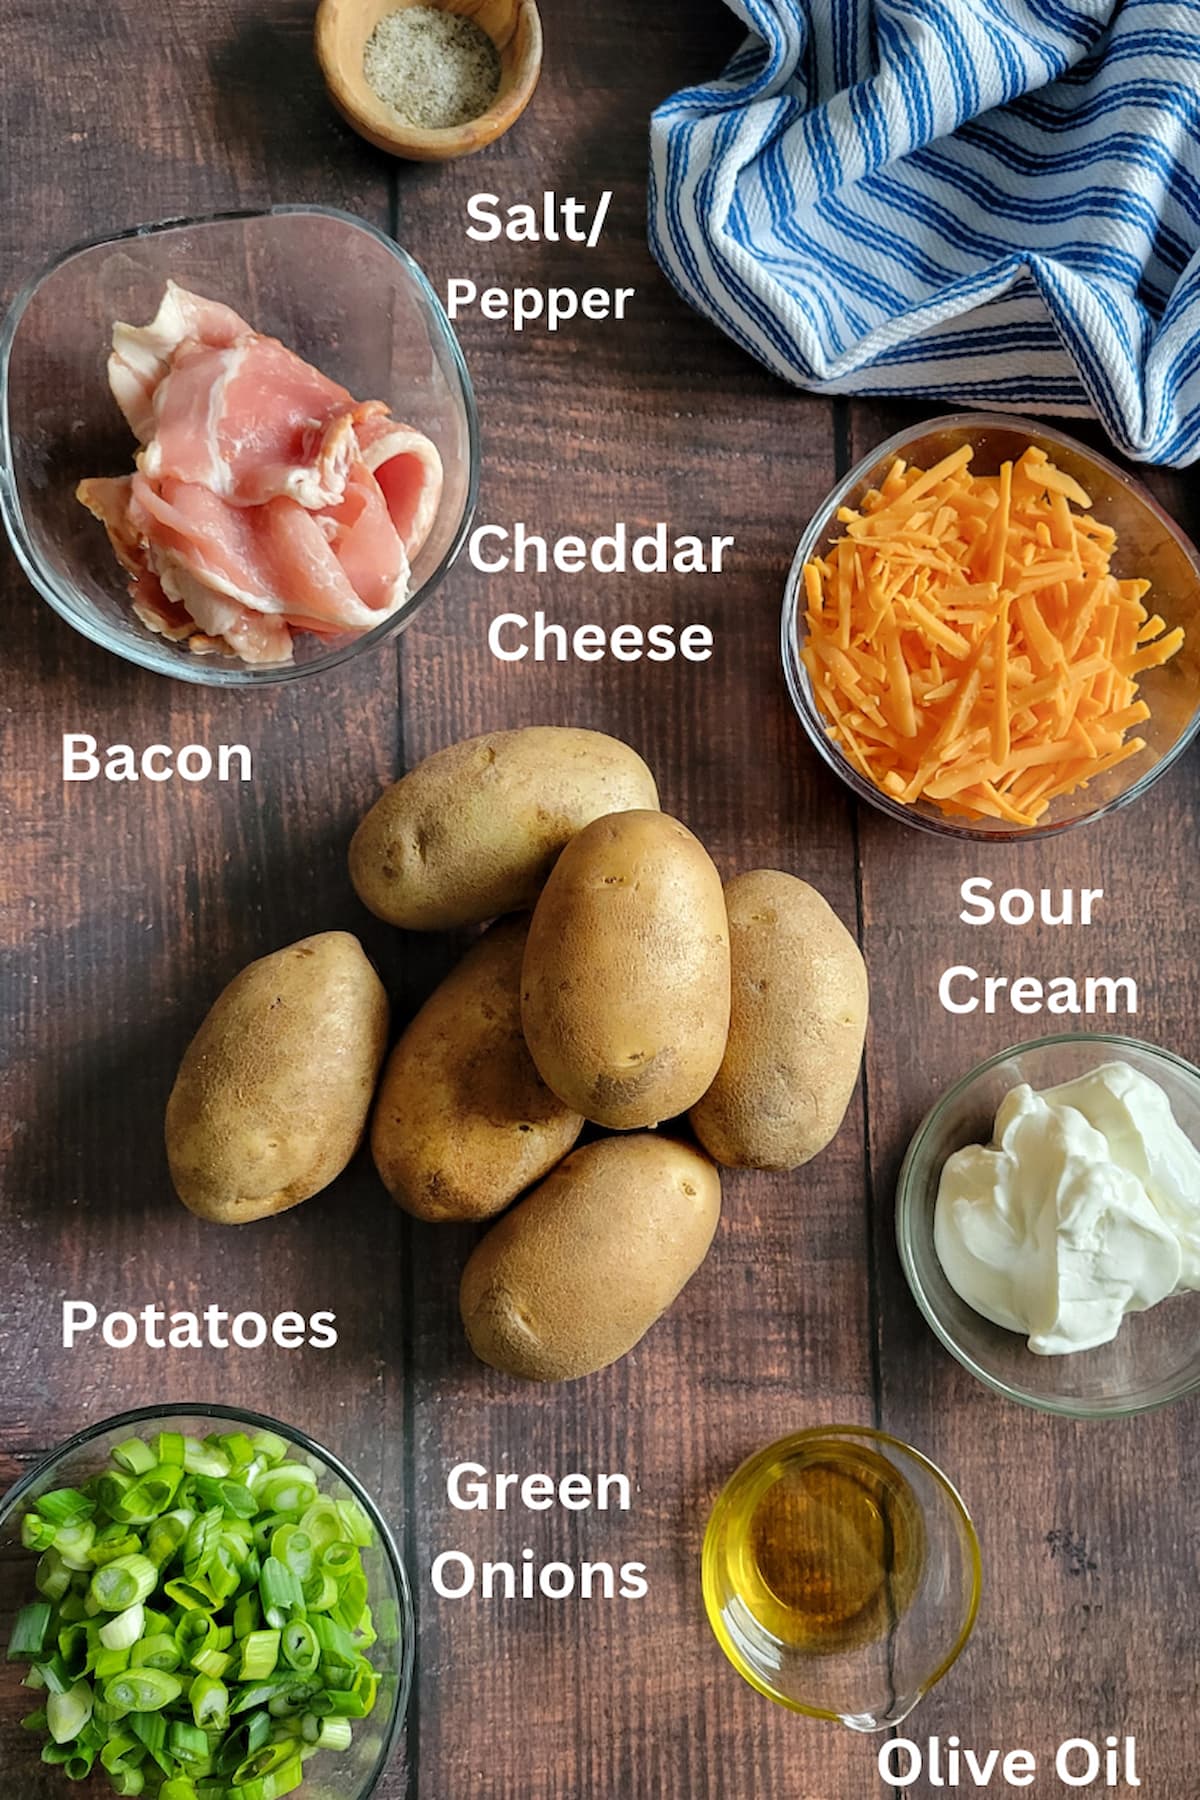 ingredients to make loaded potato skins - potatoes, bacon, green onions, cheddar cheese, salt/pepper, olive oil, sour cream